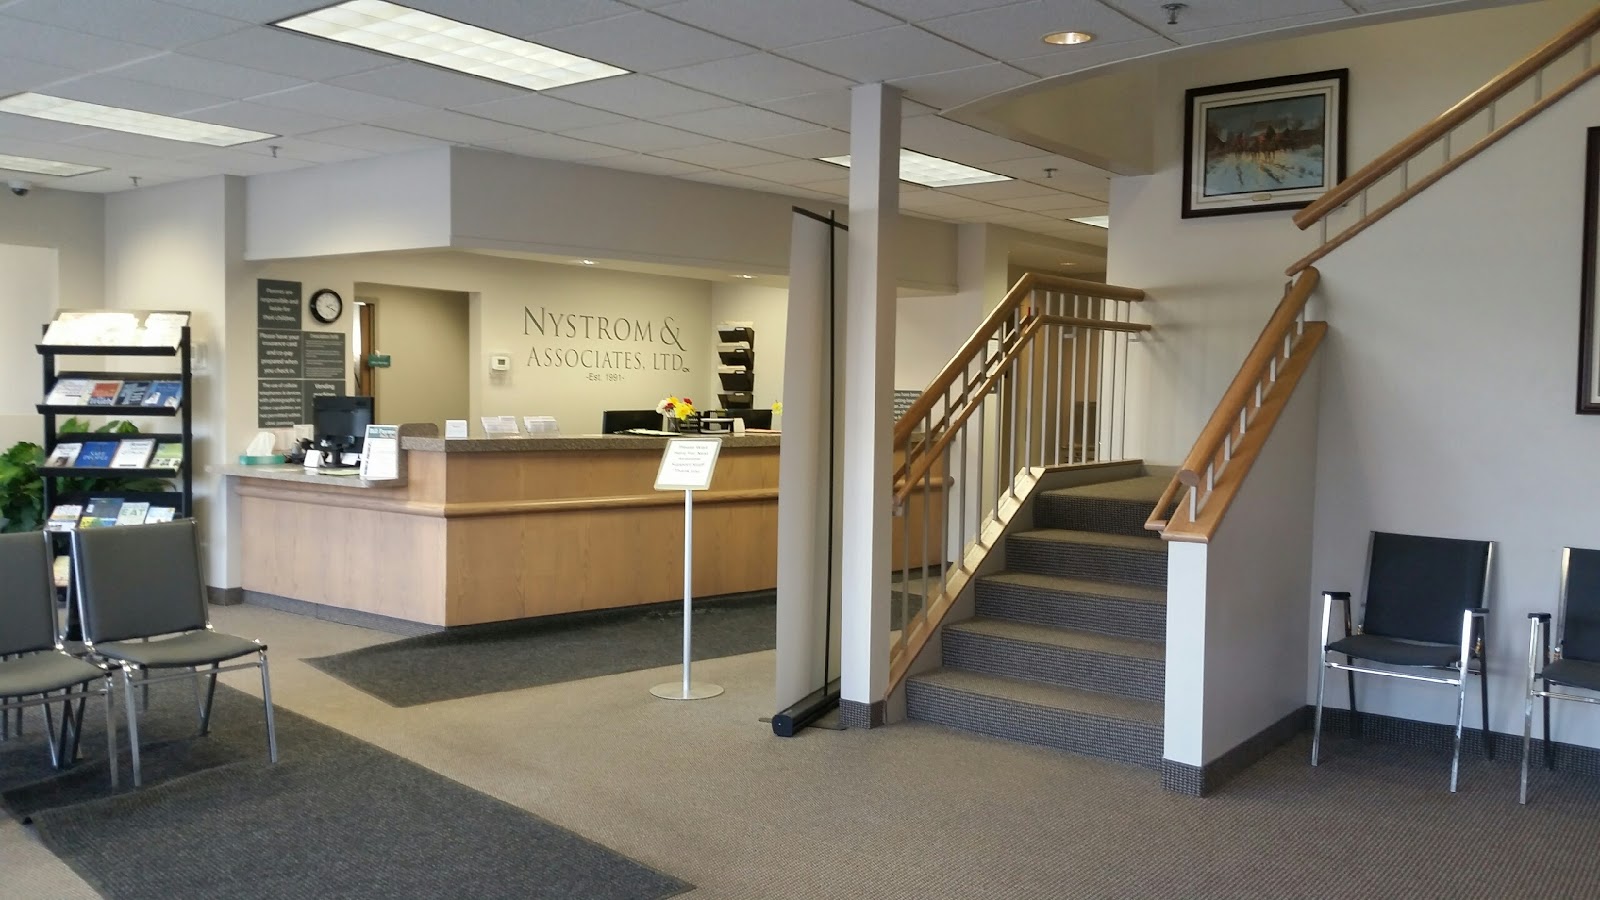 Nystrom and Associates